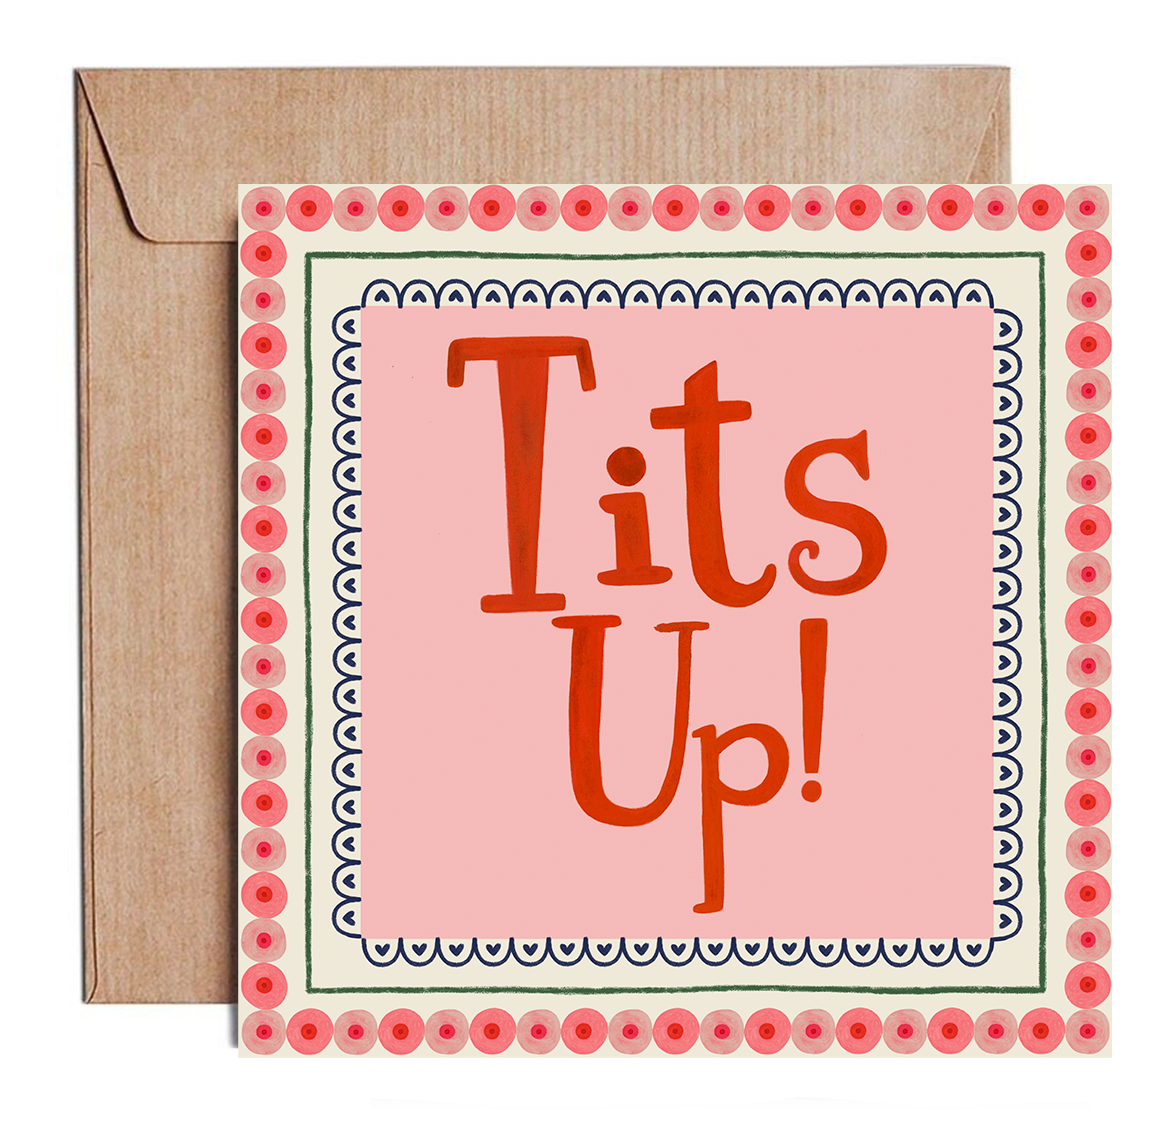 TITS UP! card